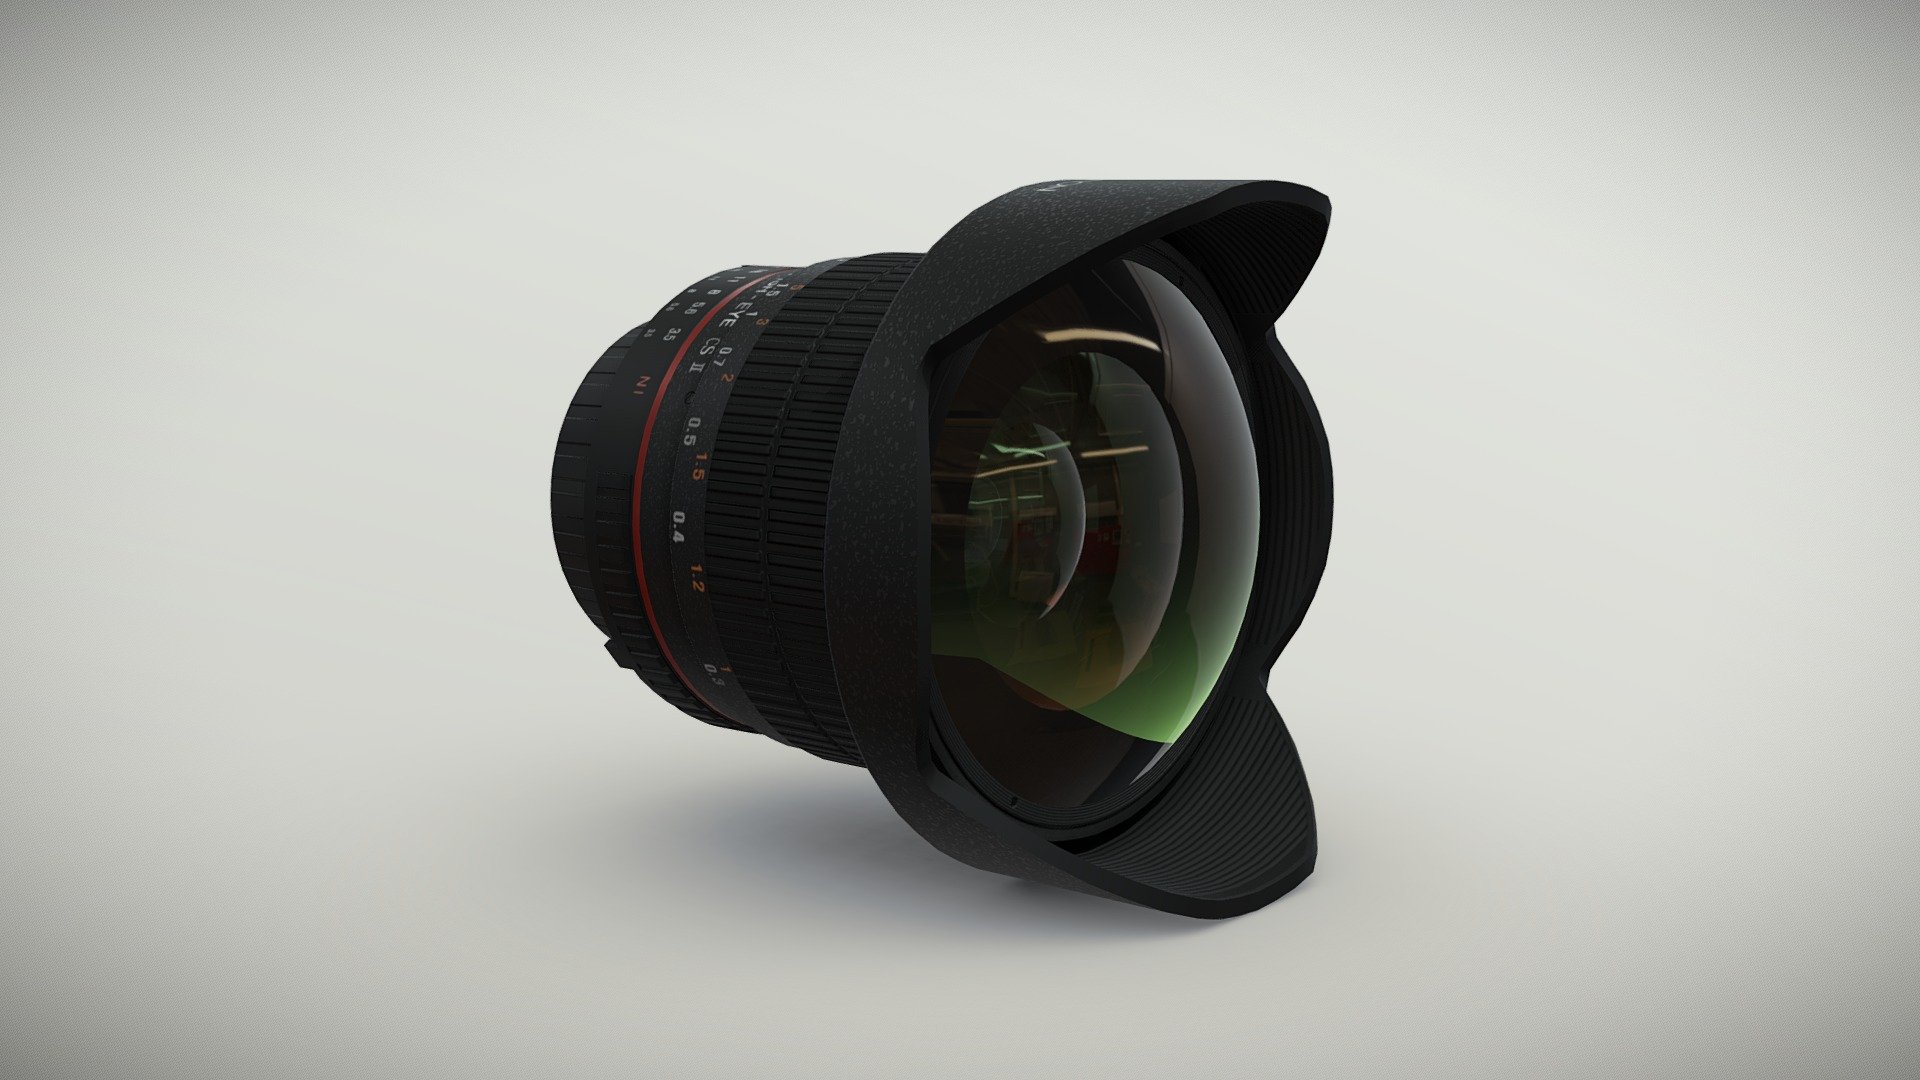 •   Let me present to you high-quality low-poly 3D model Rokinon 8mm f/3.5 AS IF UMC Fish-eye CS II AE Nikon F mount Lens. Modeling was made with ortho-photos of real lens that is why all details of design are recreated most authentically.

•    This model consists of three meshes, it is low-polygonal and it has three materials (for Lens body and Glass of Lens).

•   The total of the main textures is 4. Resolution of all textures is 2048 pixels square aspect ratio in .png format. Also there is original texture file .PSD format in separate archive.

•   Polygon count of the model is – 7493.

•   The model has correct dimensions in real-world scale. All parts grouped and named correctly.

•   To use the model in other 3D programs there are scenes saved in formats .fbx, .obj, .DAE, .max (2010 version).

Note: If you see some artifacts on the textures, it means compression works in the Viewer. We recommend setting HD quality for textures. But anyway, original textures have no artifacts 3d model